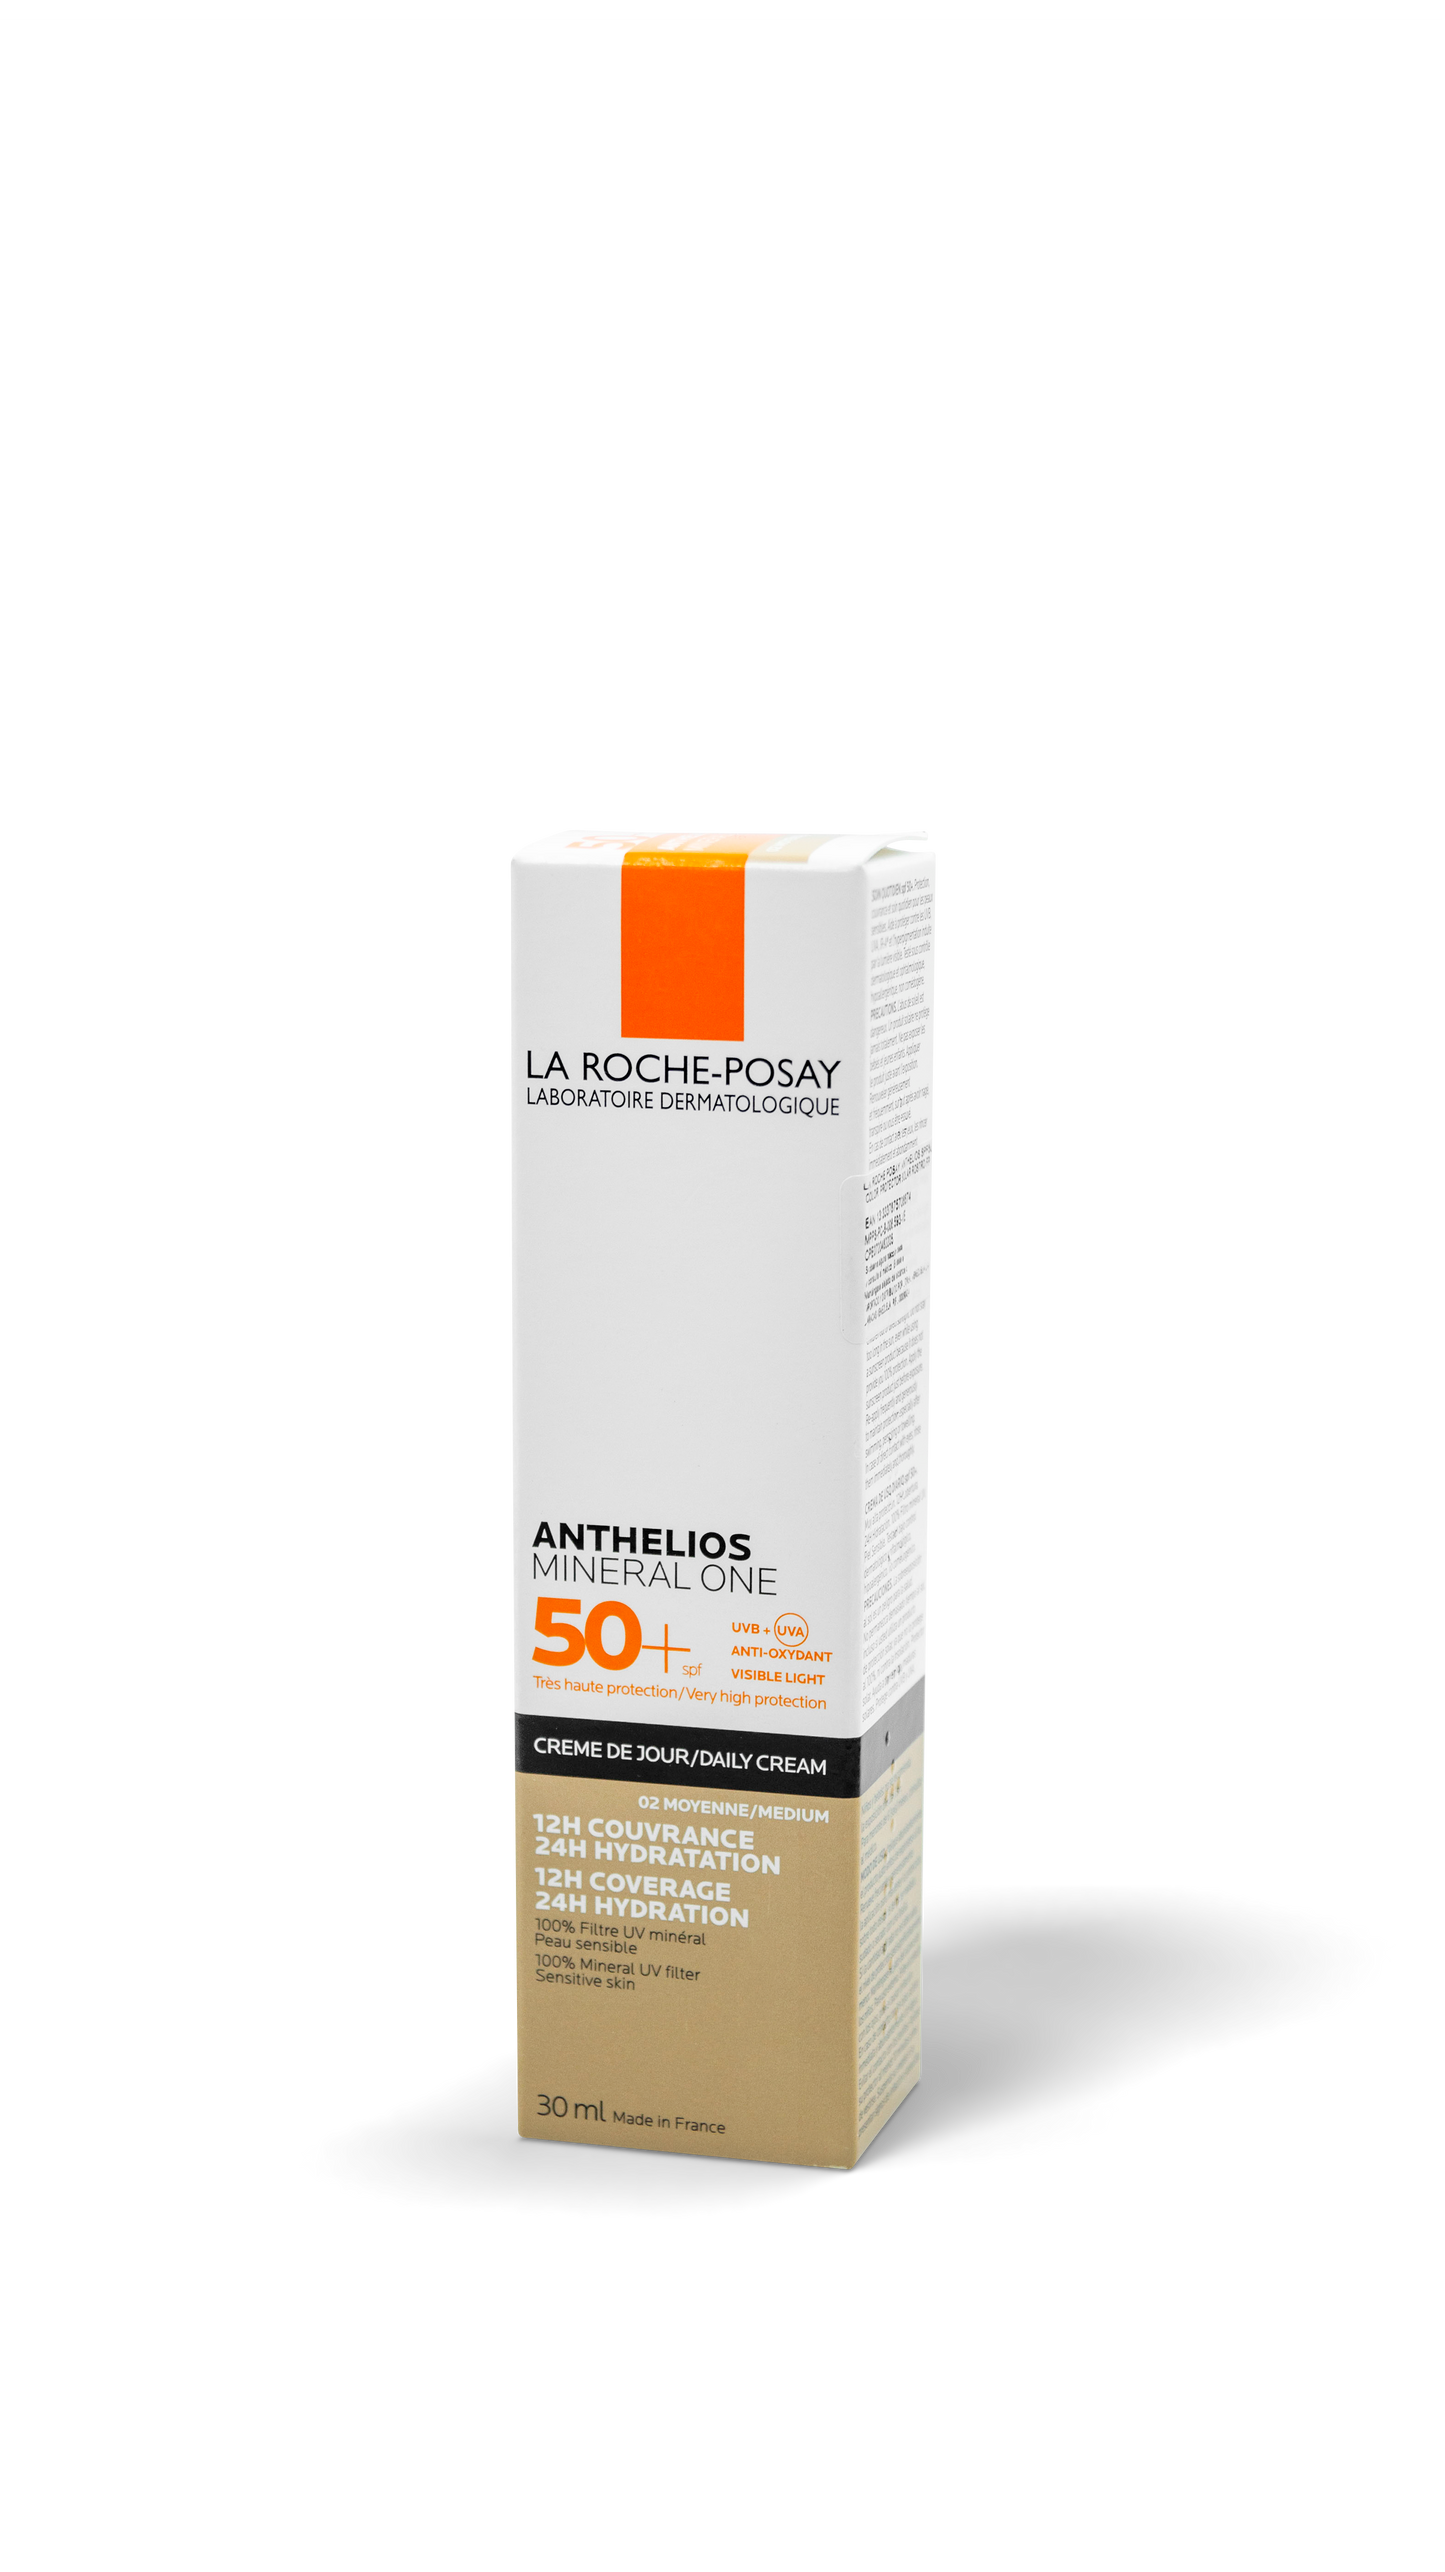 Anthelios mineral one SPF 50+ 30mL